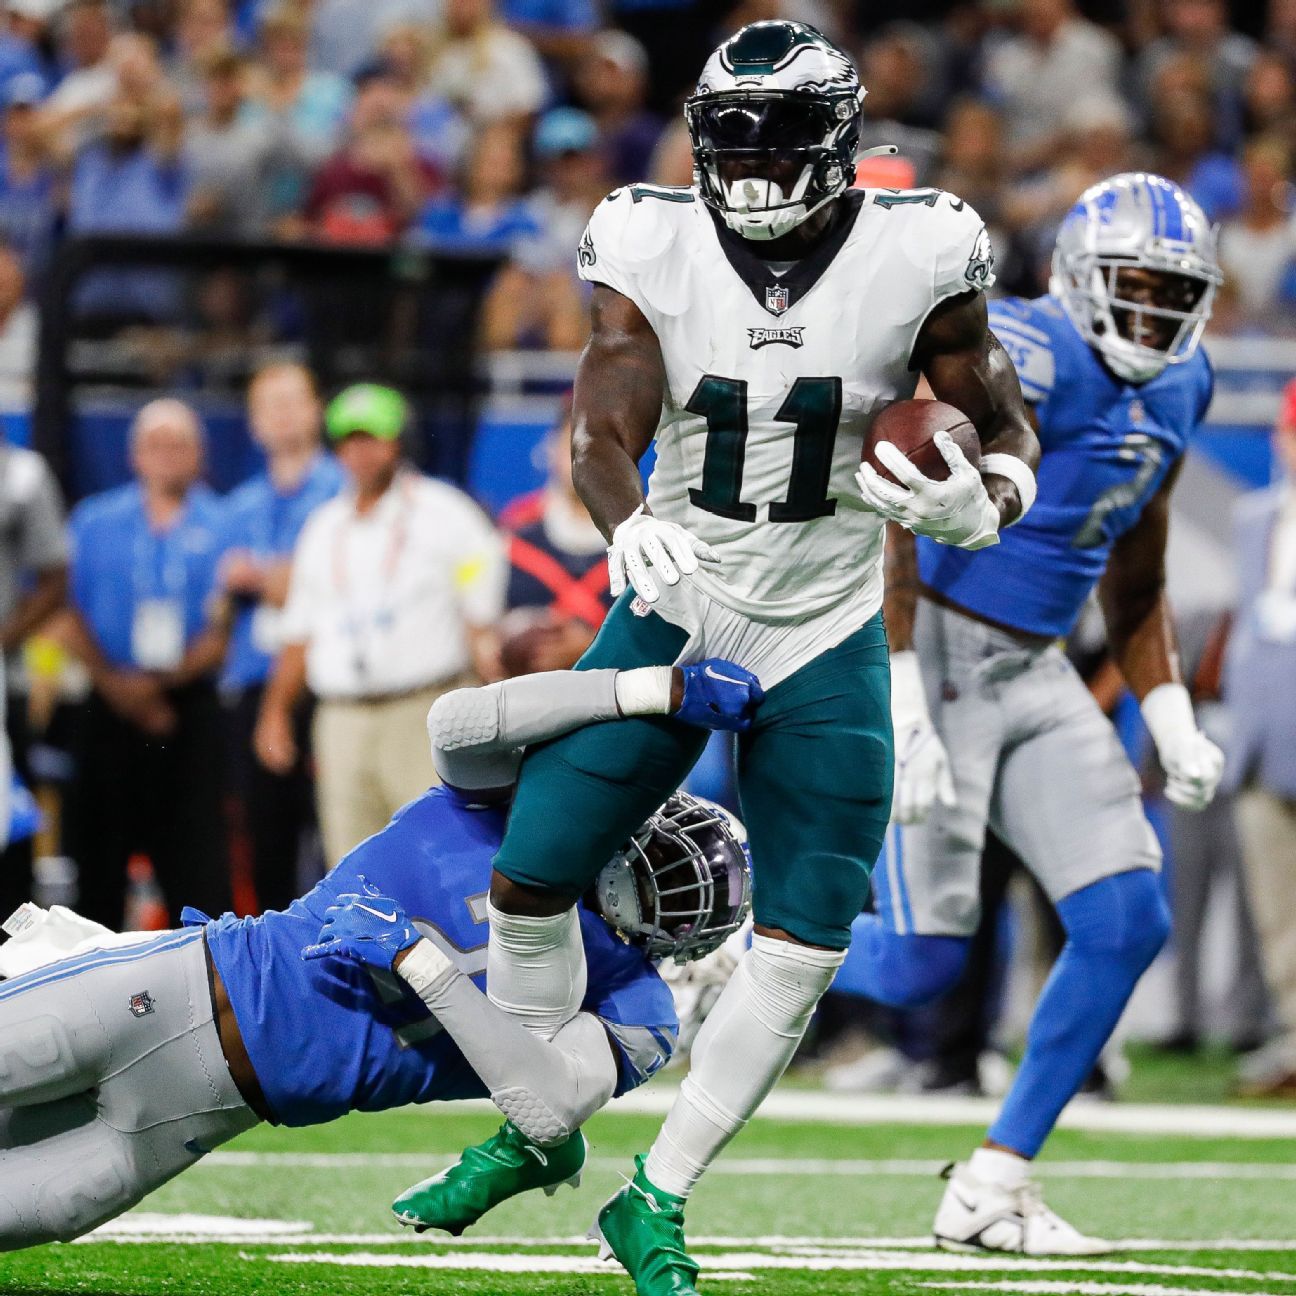 WR A.J. Brown sets Philadelphia Eagles receiving record in debut with team